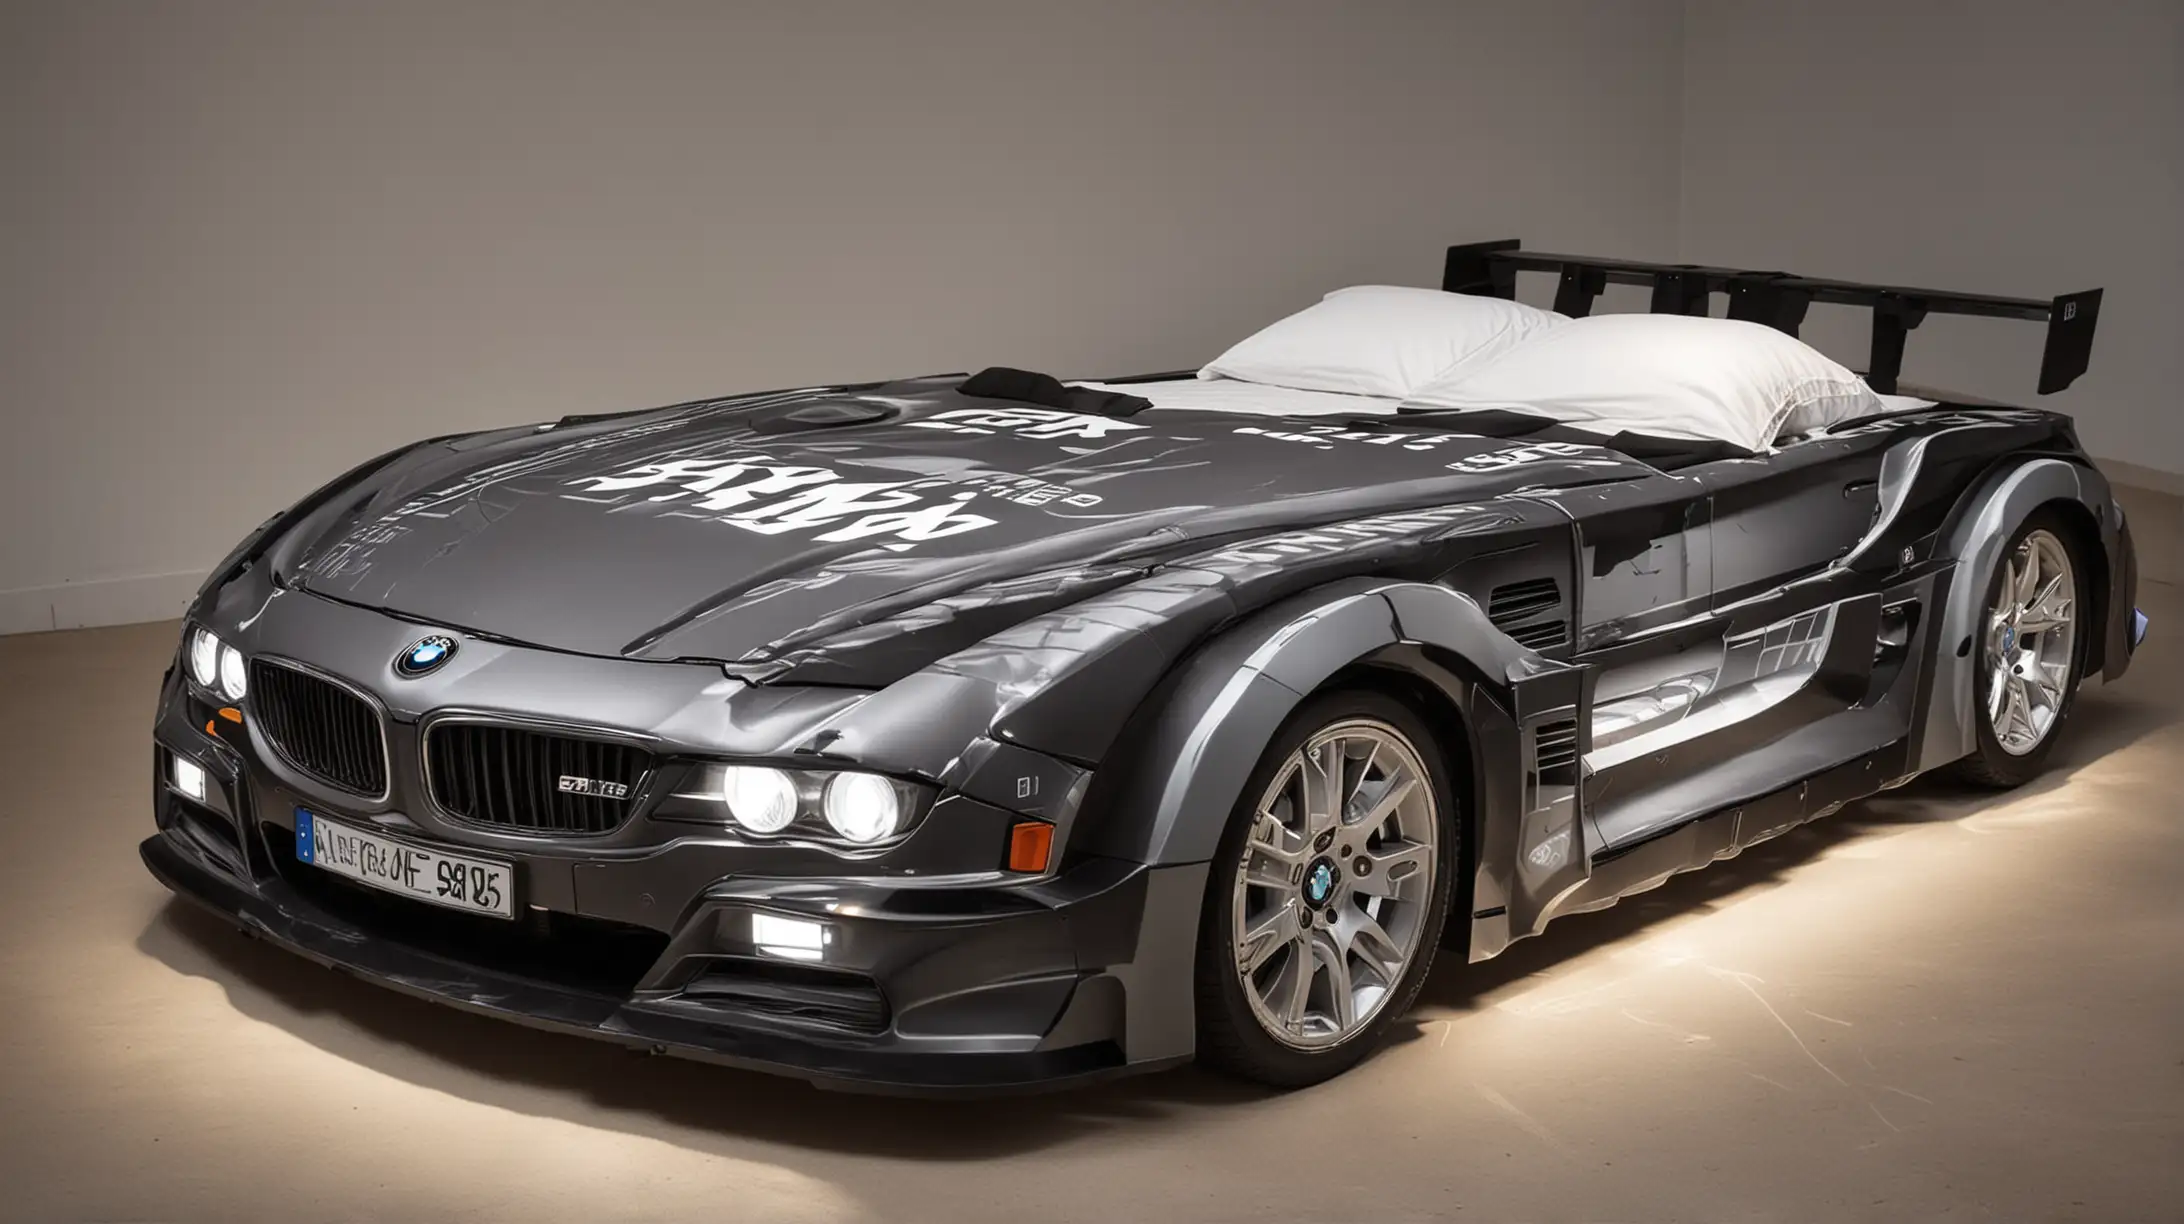 Luxurious BMW CarShaped Double Bed with Headlights